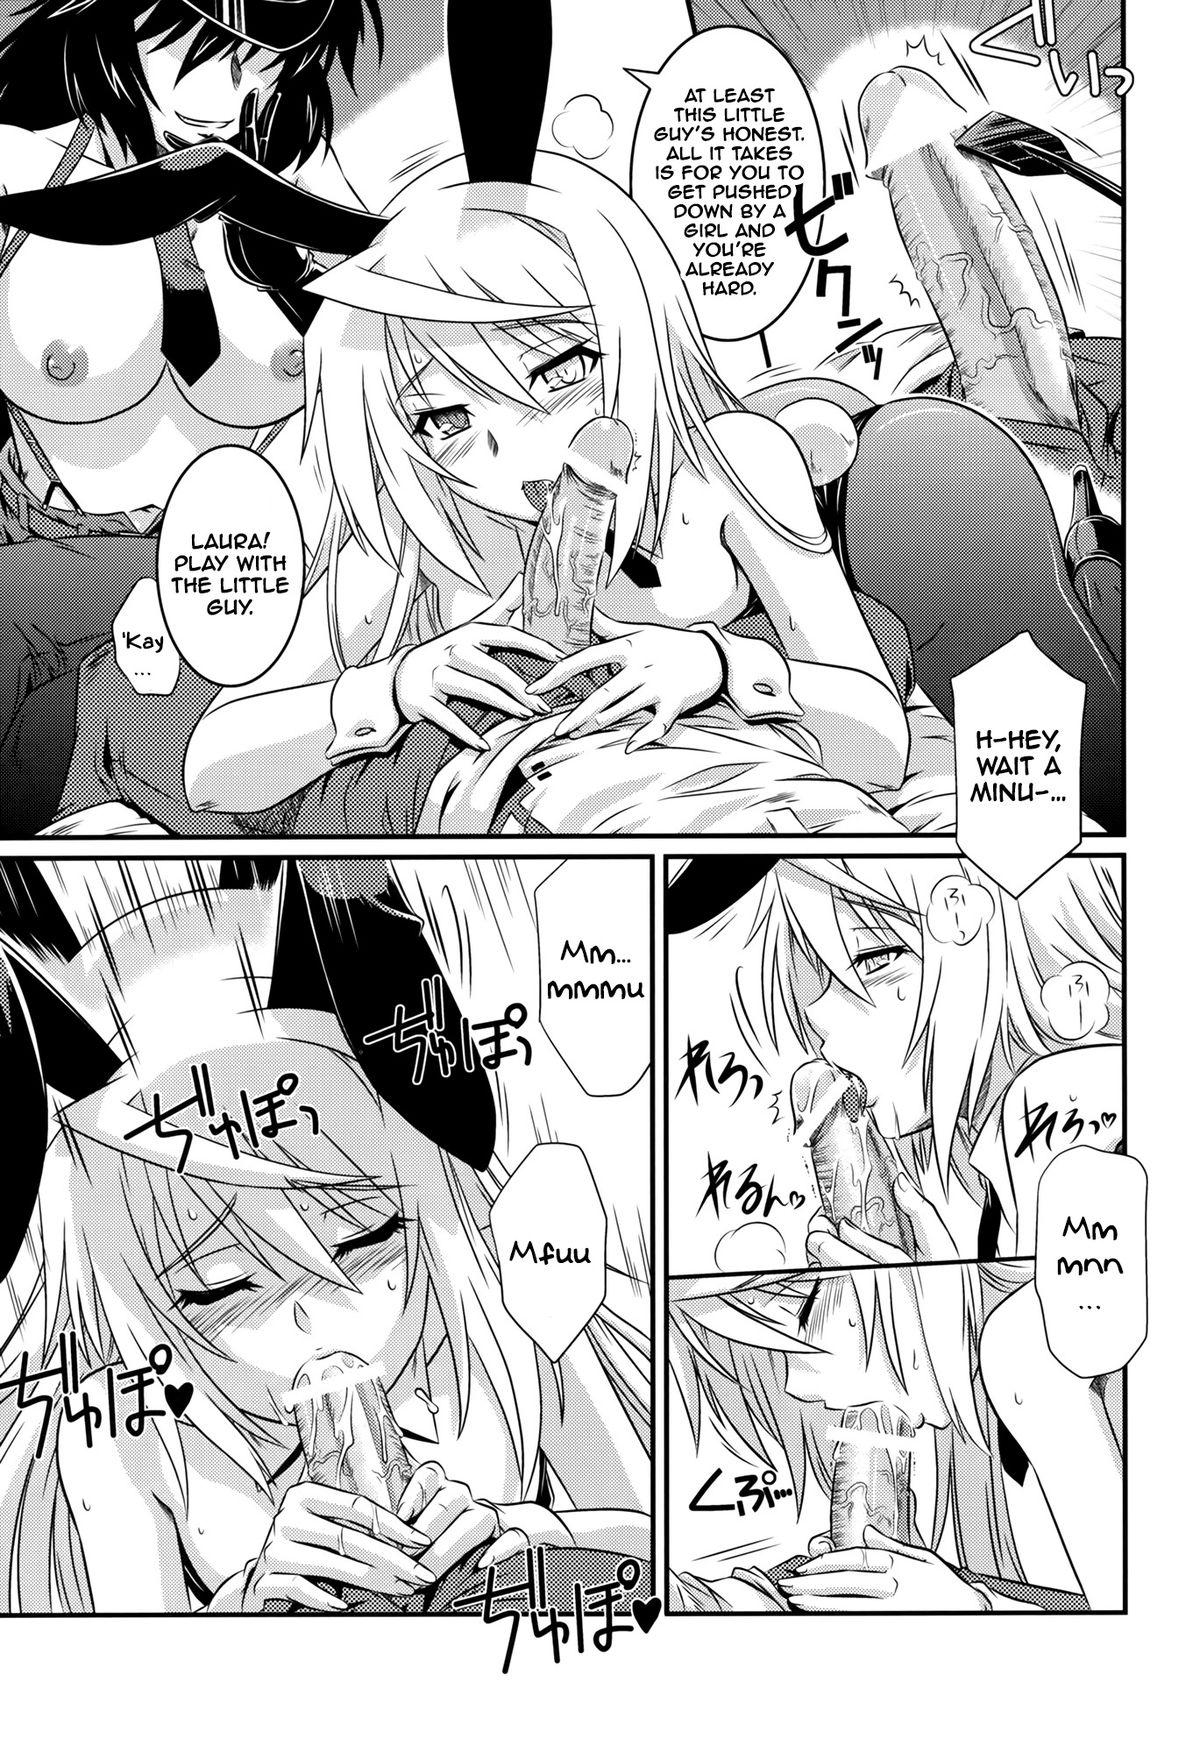 Bwc is Incest Strategy 4 - Infinite stratos Amateur Sex Tapes - Page 6